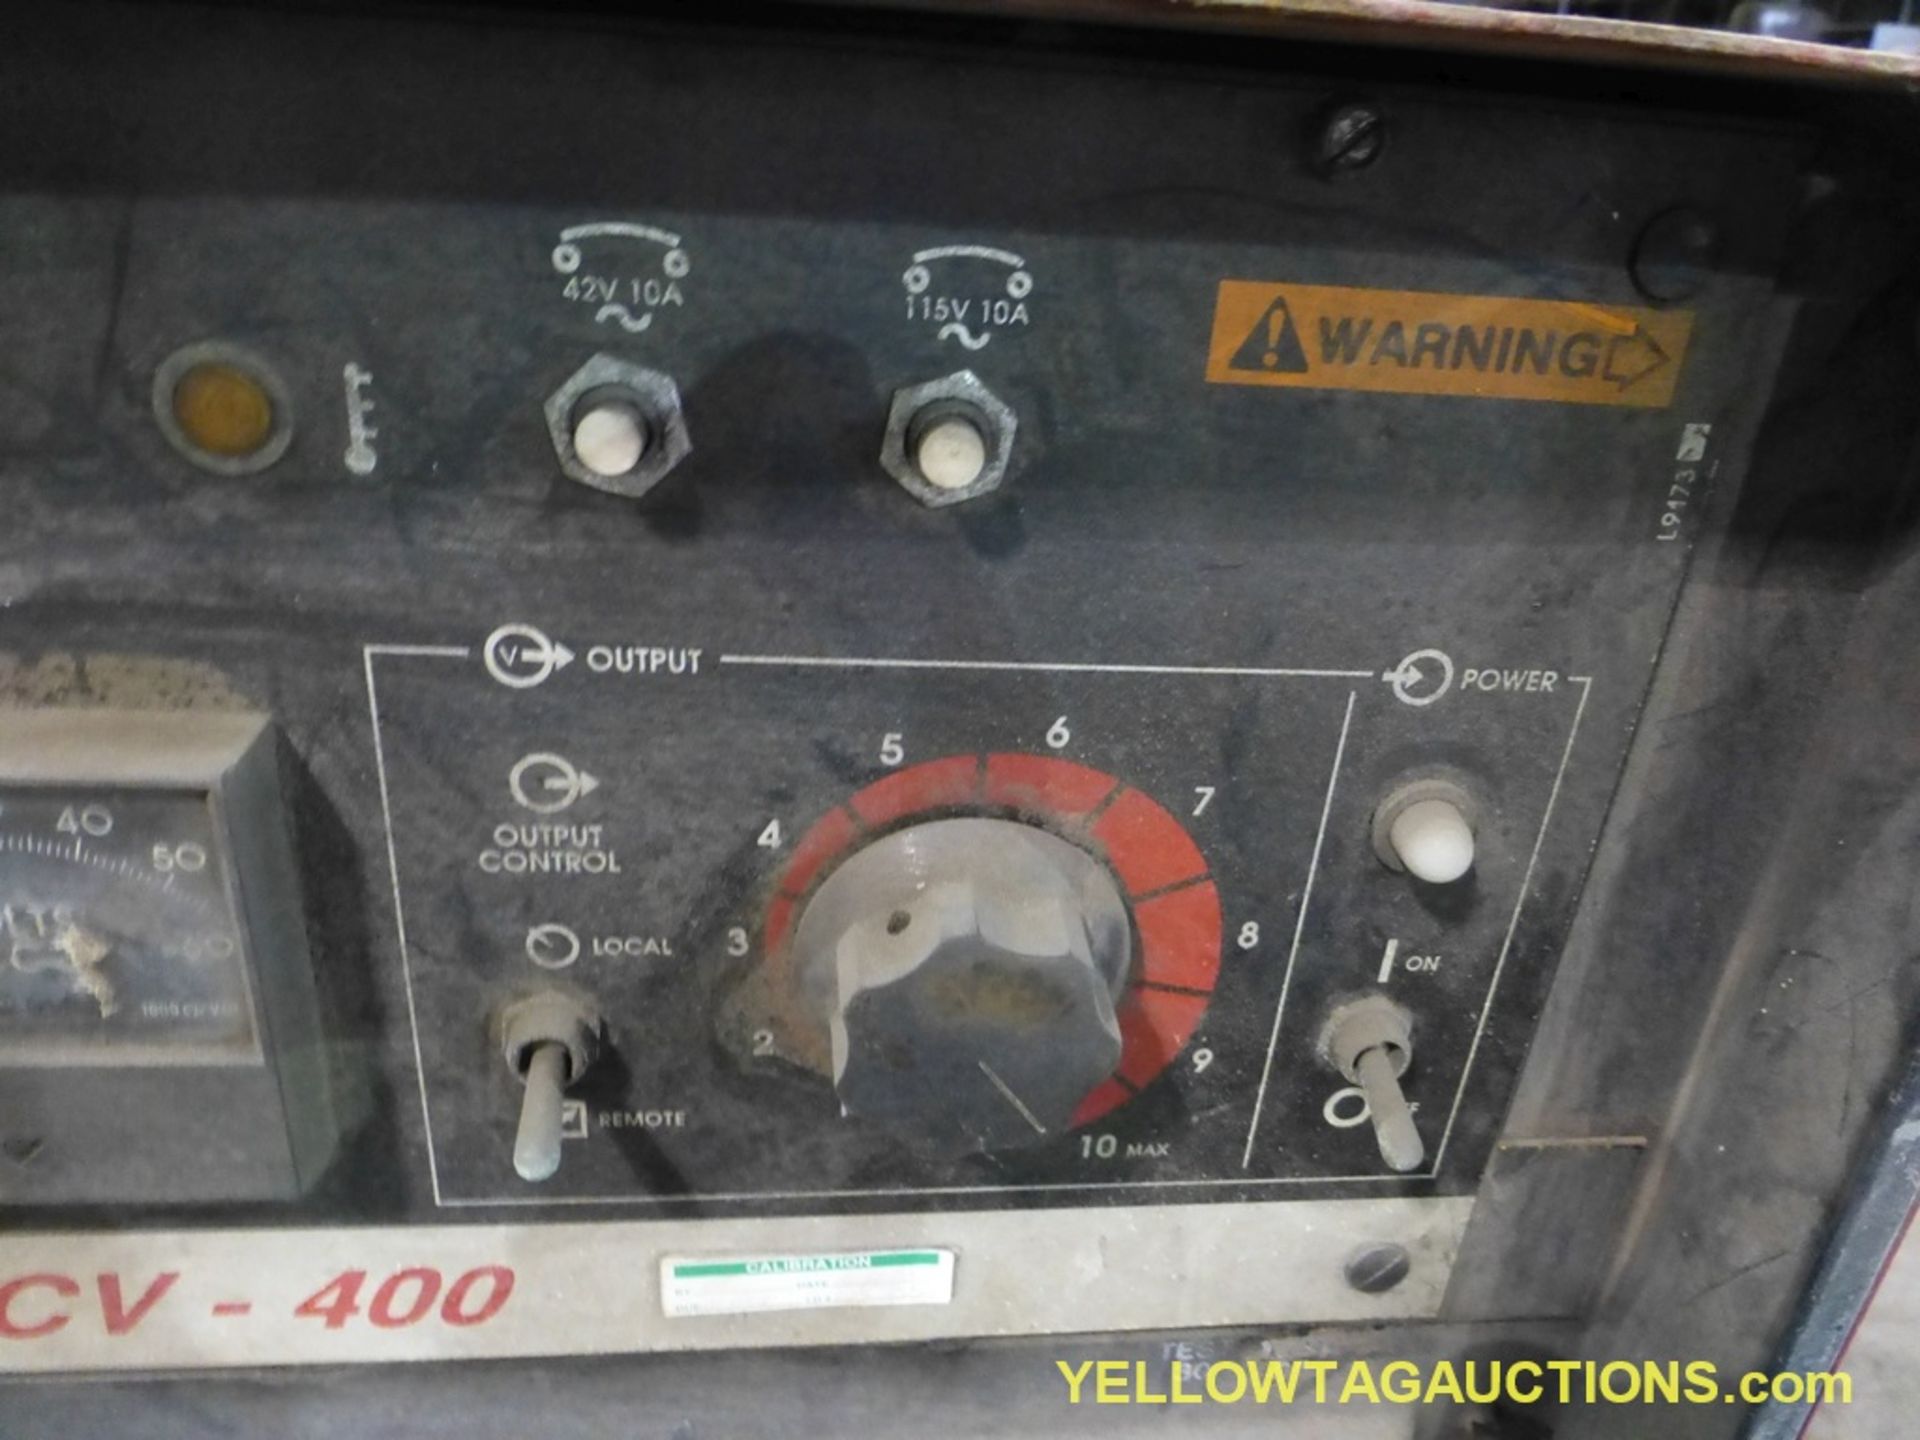 Lot of (2) Lincoln Electric CV-400 Welder | Model No. CV-400; Code: 10084M; 60A at 12V to 500A at 42 - Image 8 of 8